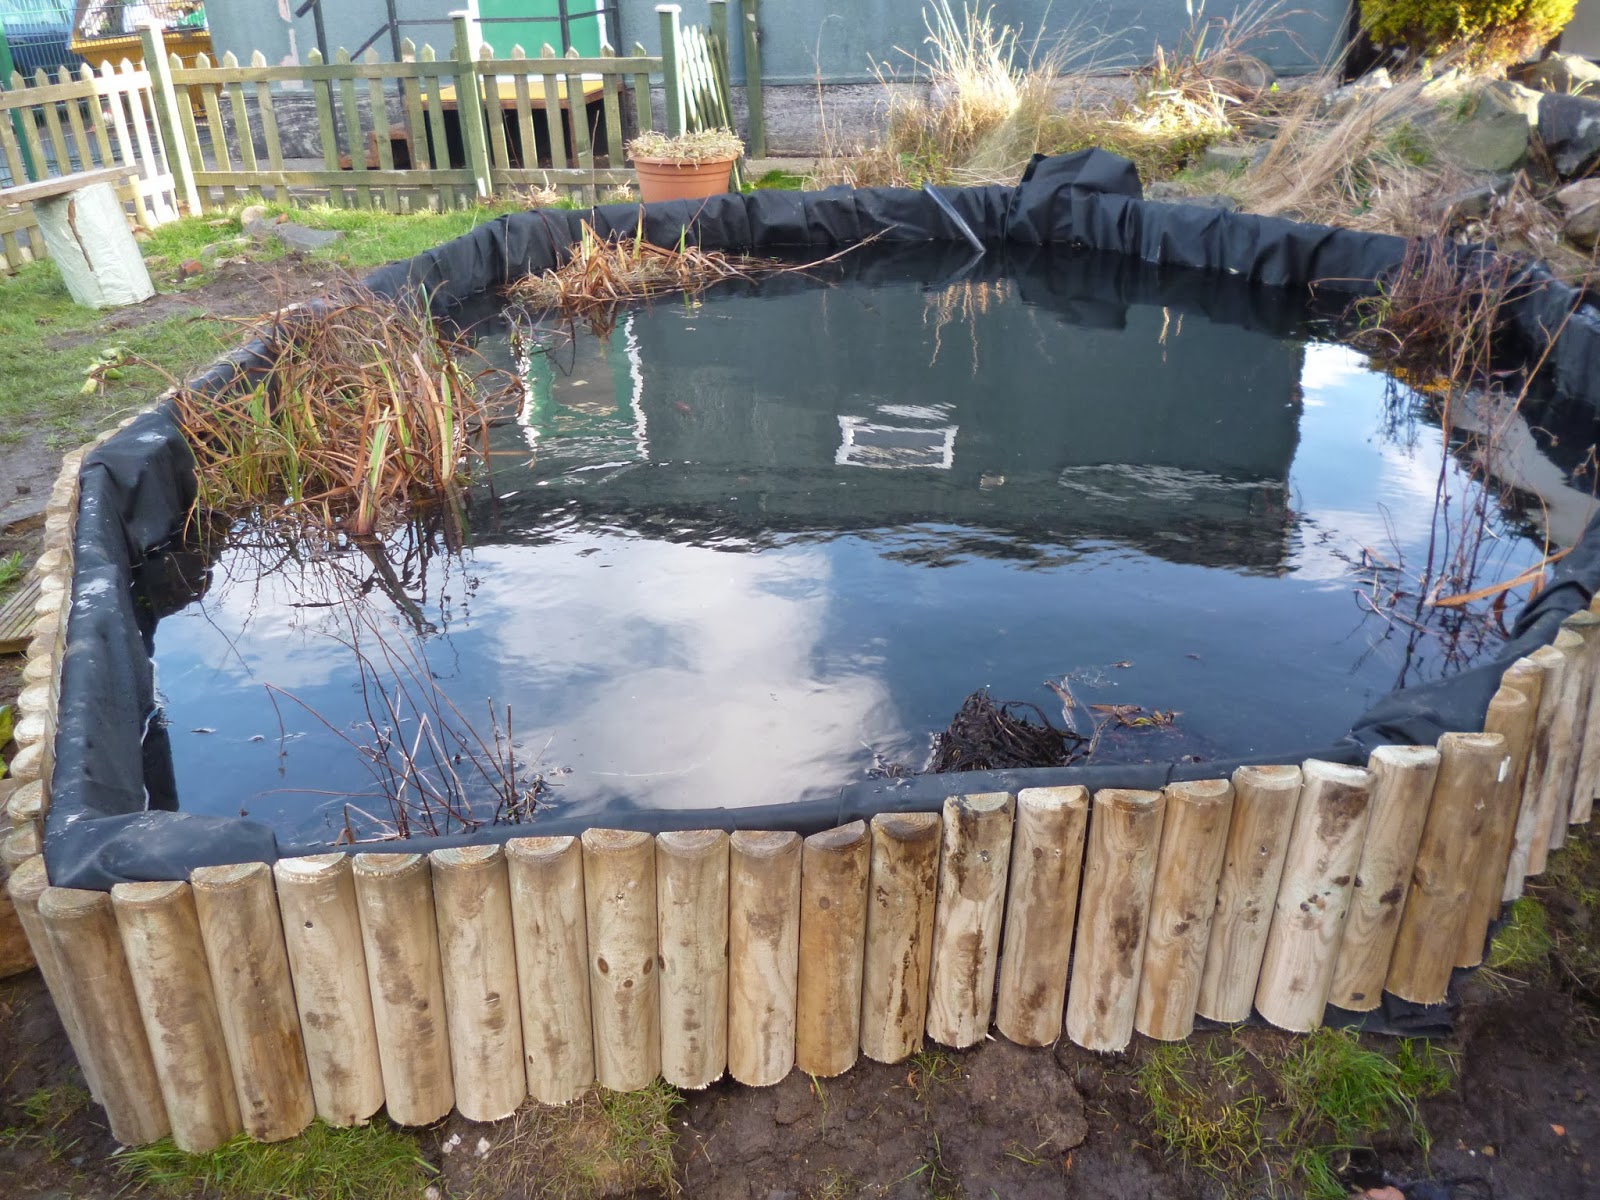 The EPICC Garden Project: Edging and planting the pond.